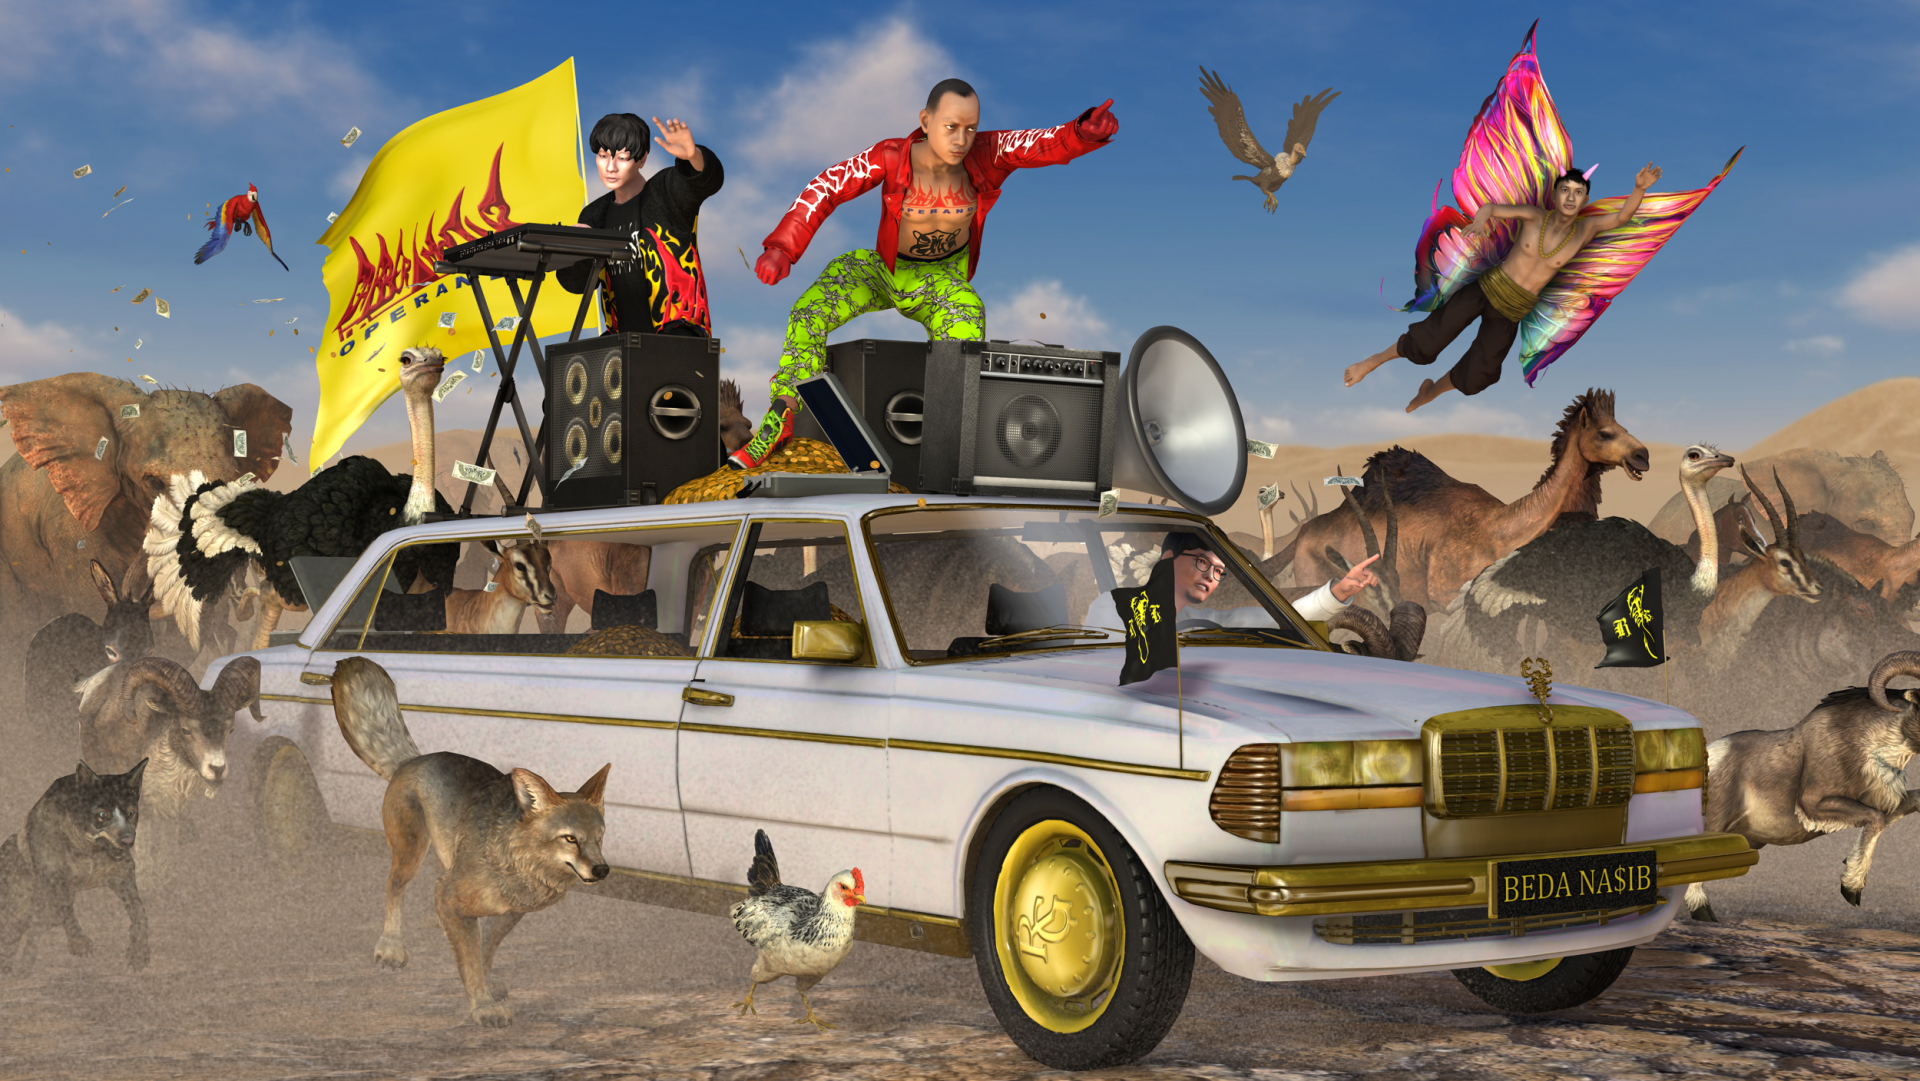 A digital image of a white limo riding through a dusty barren landscape. Various animals and birds run alongside it, and men in colorful outfits stand on top with amps and other music equipment